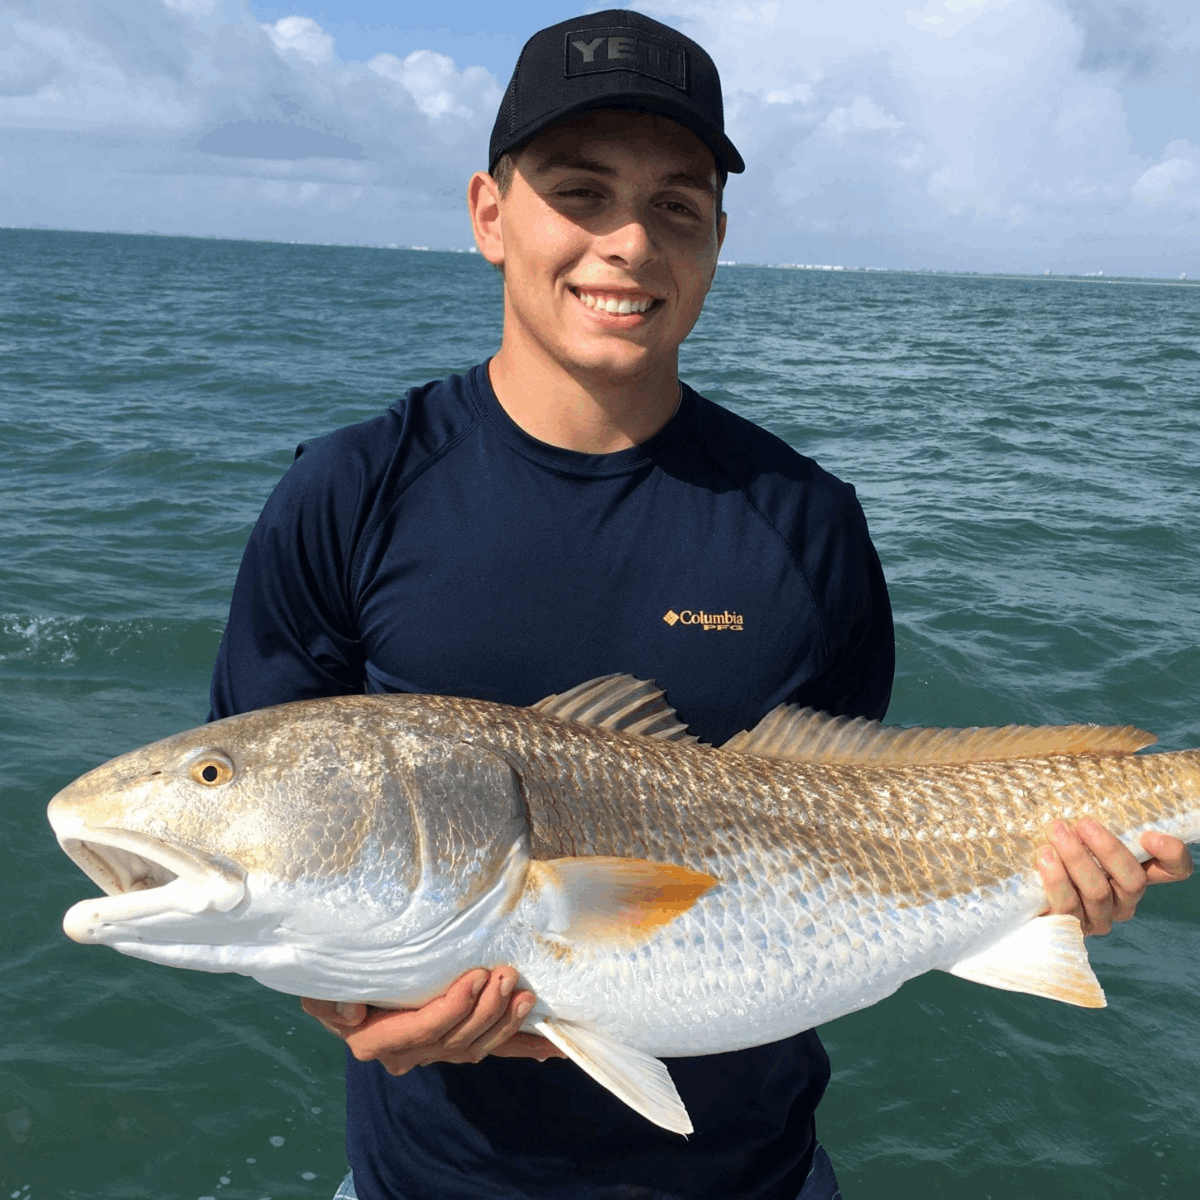 Tampa Bay Fishing spots - Numbers